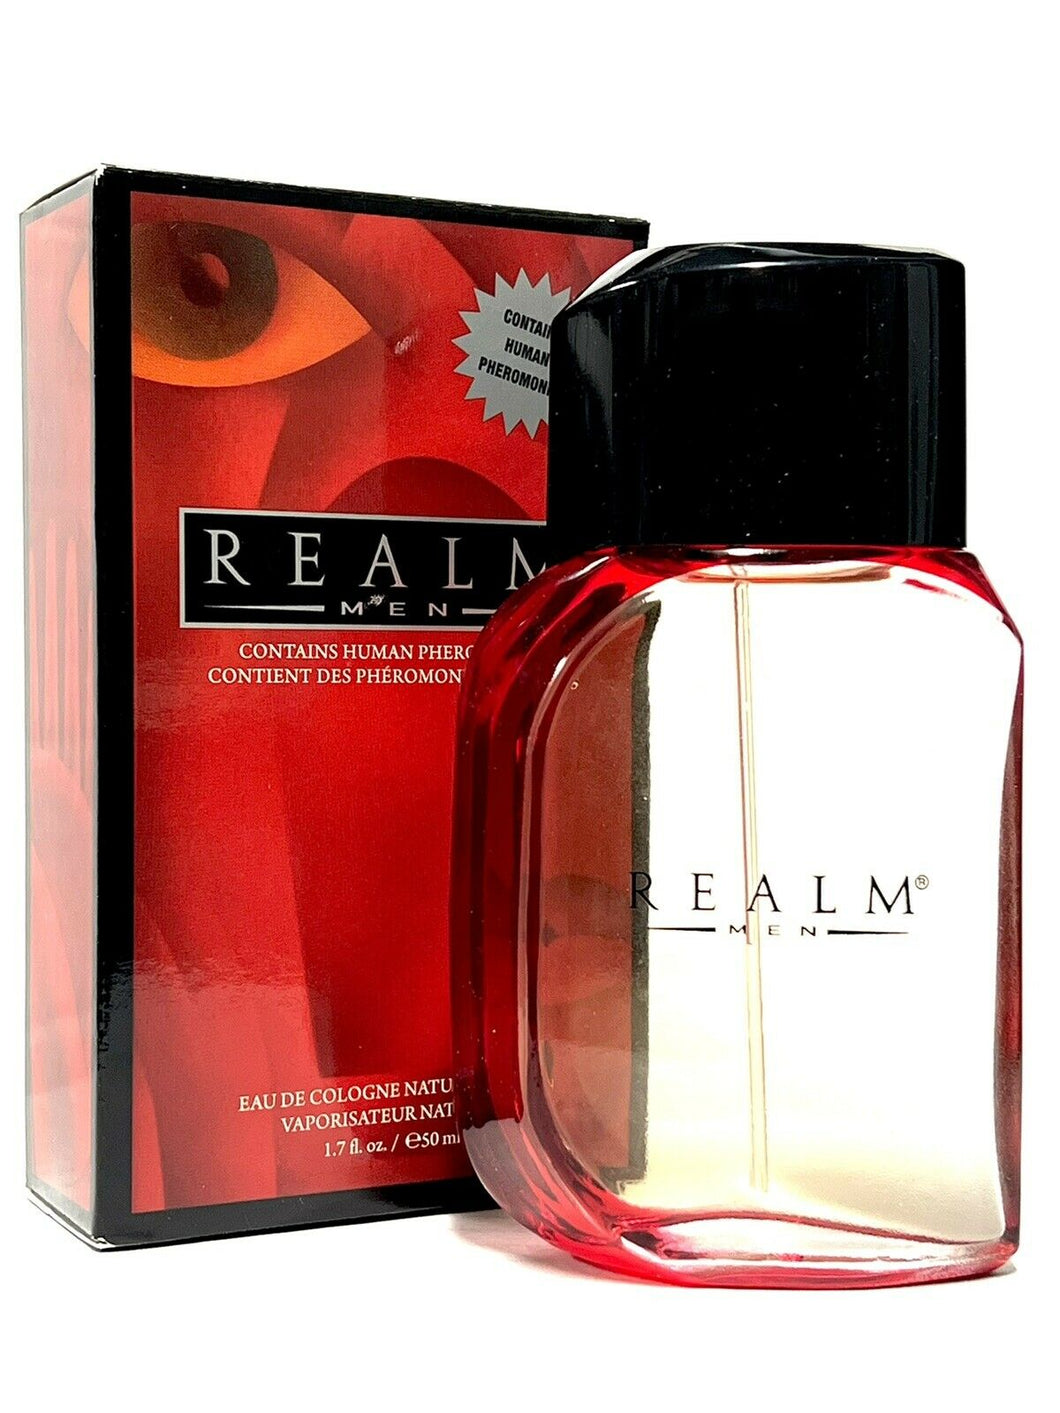 Realm for Men by Erox 1.7 oz / 50 ml Cologne Spray For Men New in Box for Him